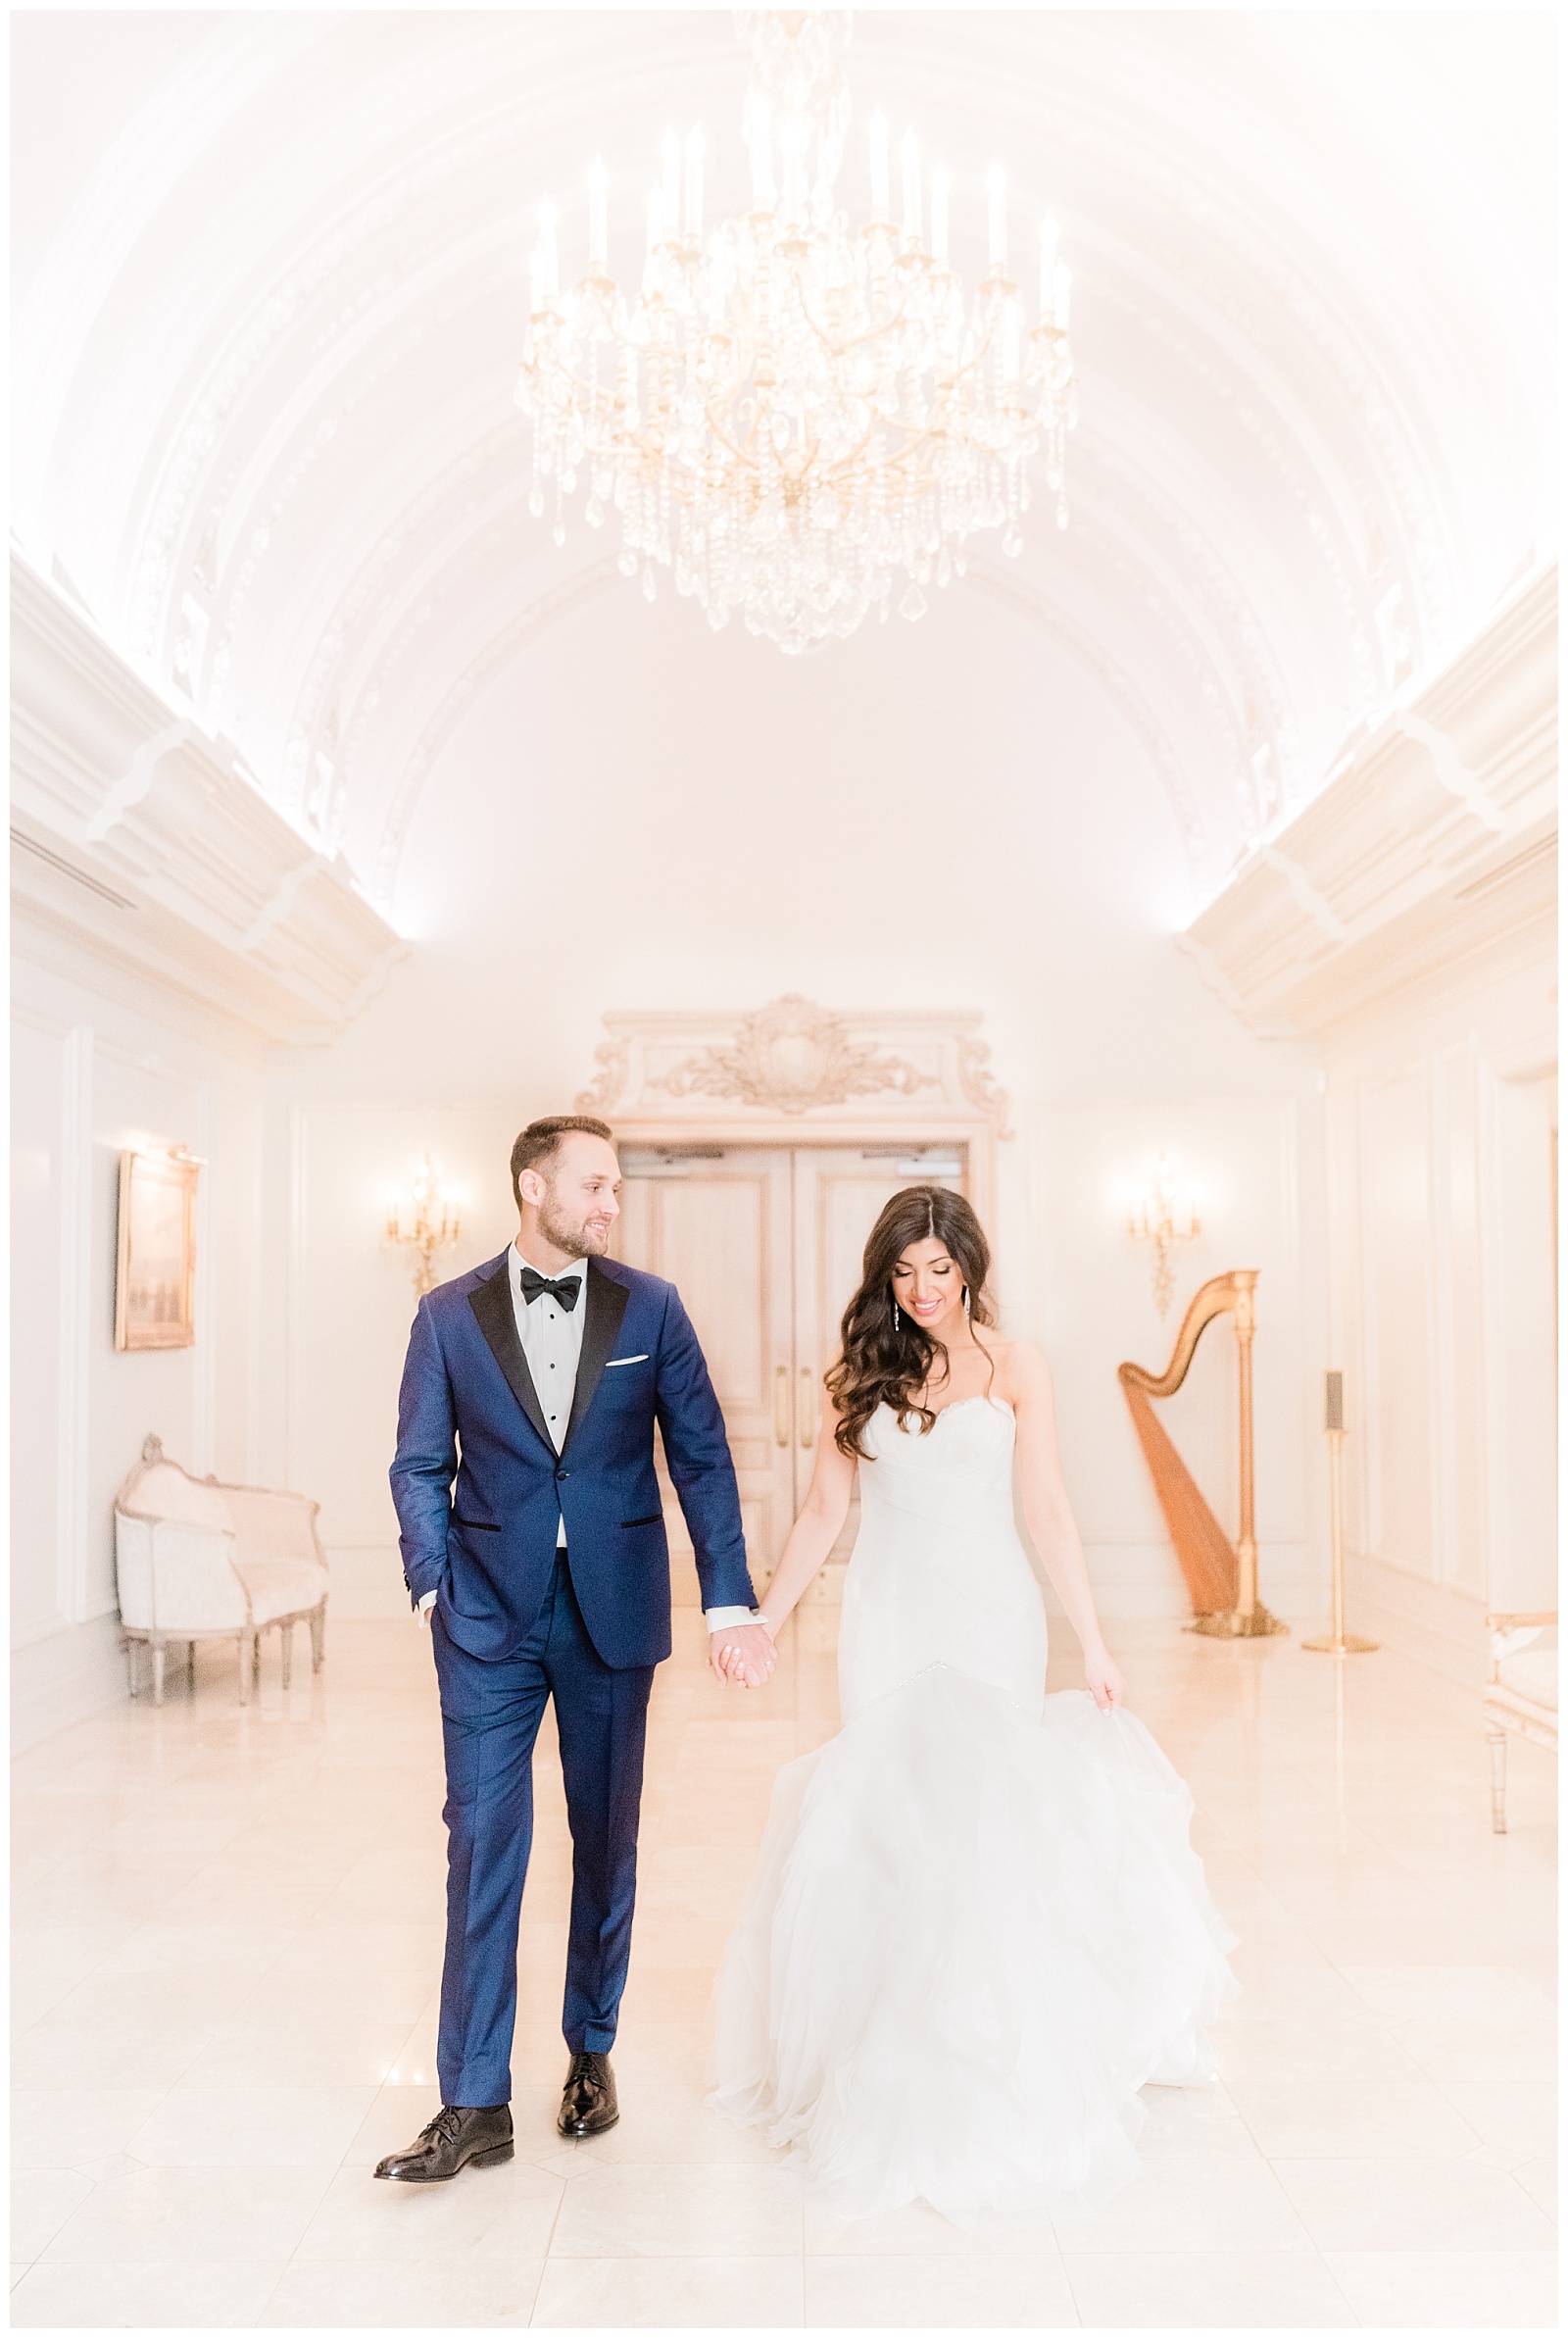 Park Chateau Wedding, Photographer, New Jersey, NJ, Winter, Bride and Groom Portraits, Light and Airy, Bright, Indoor, Elegant